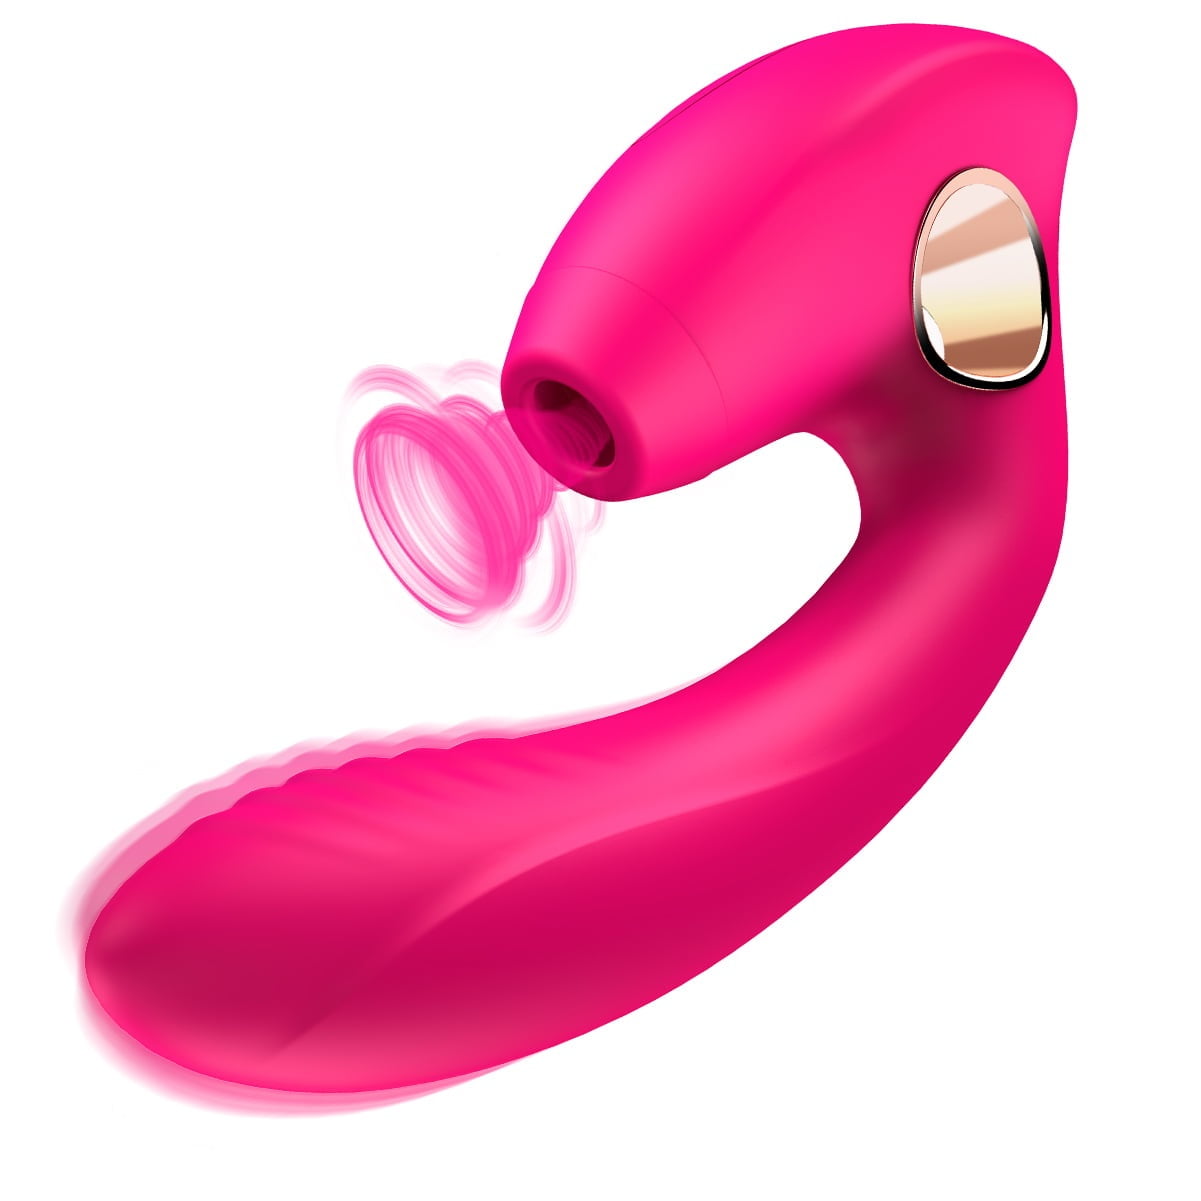 Licking andSucking Adult Sex Toy 2 in 1 Rose Flowers Toy for Women Couples-Red,Powerful Suck and Suck 10 Mode Sucker for Women/Couples G Spot Stimulater image